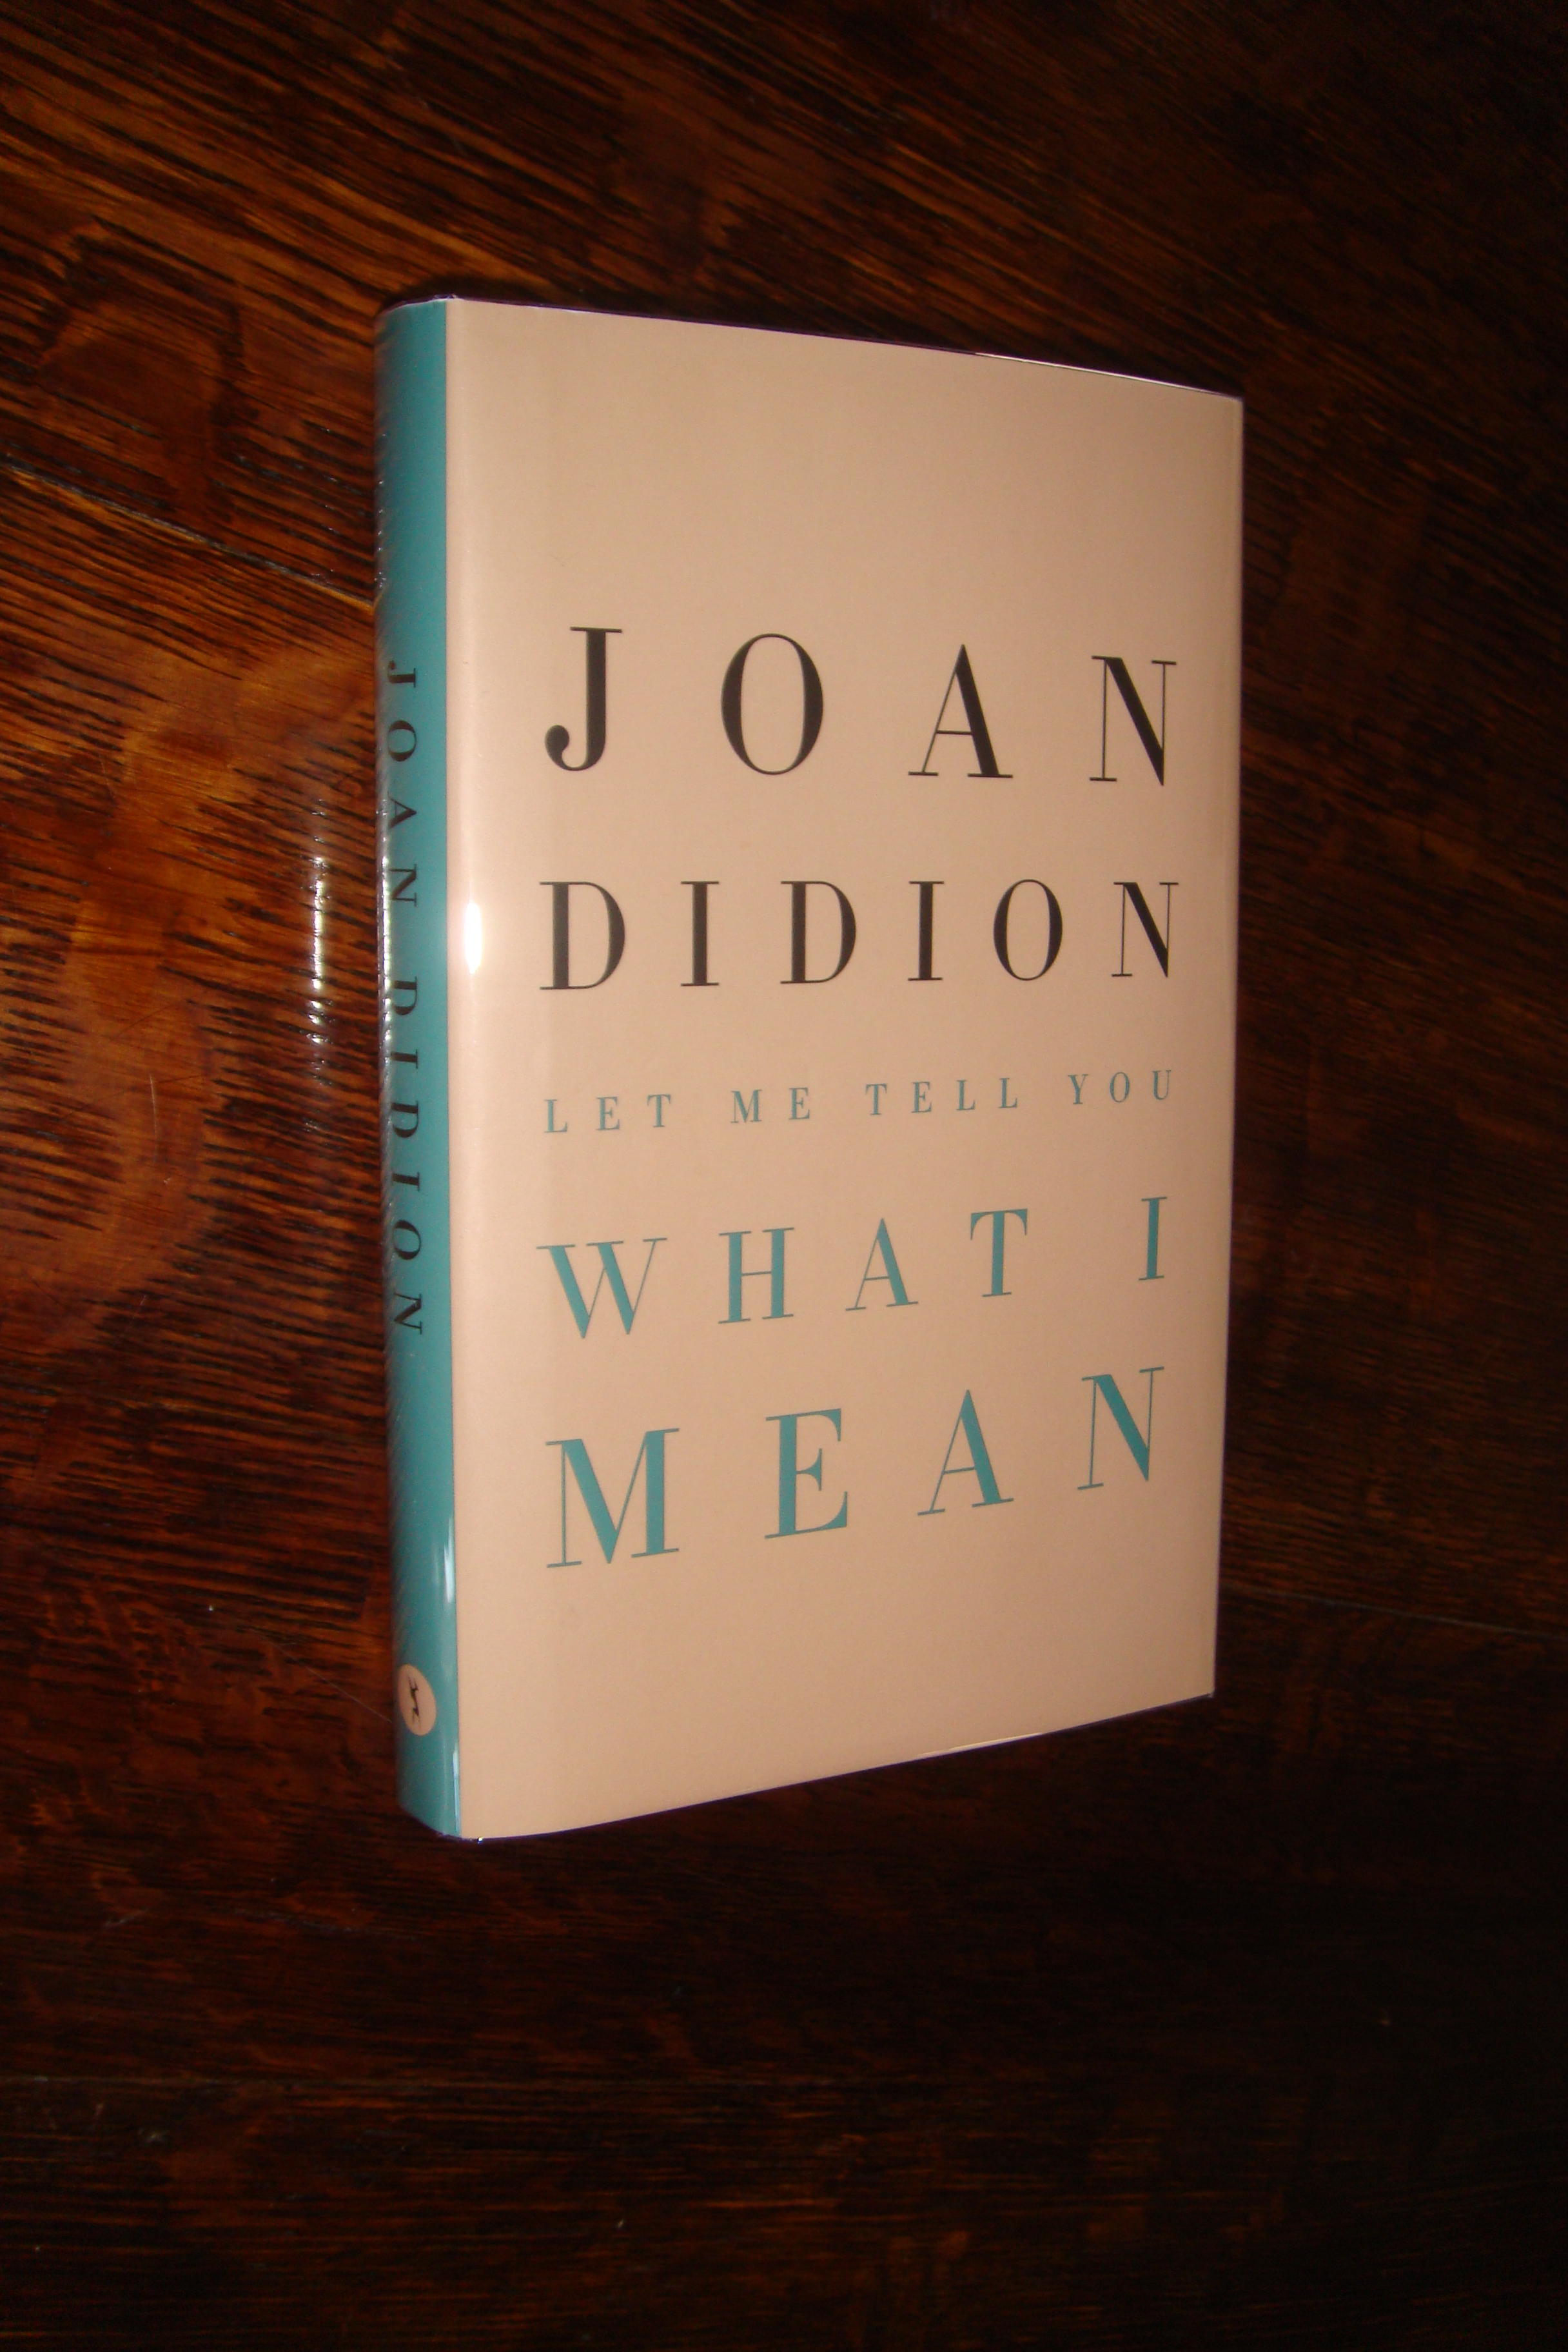 Tell　Rare　by　(2021)　(first　You　1st　Edition　What　Joan:　I　Books　Hardcover　printing)　Mean　Didion,　Fine　Medium　Let　Me